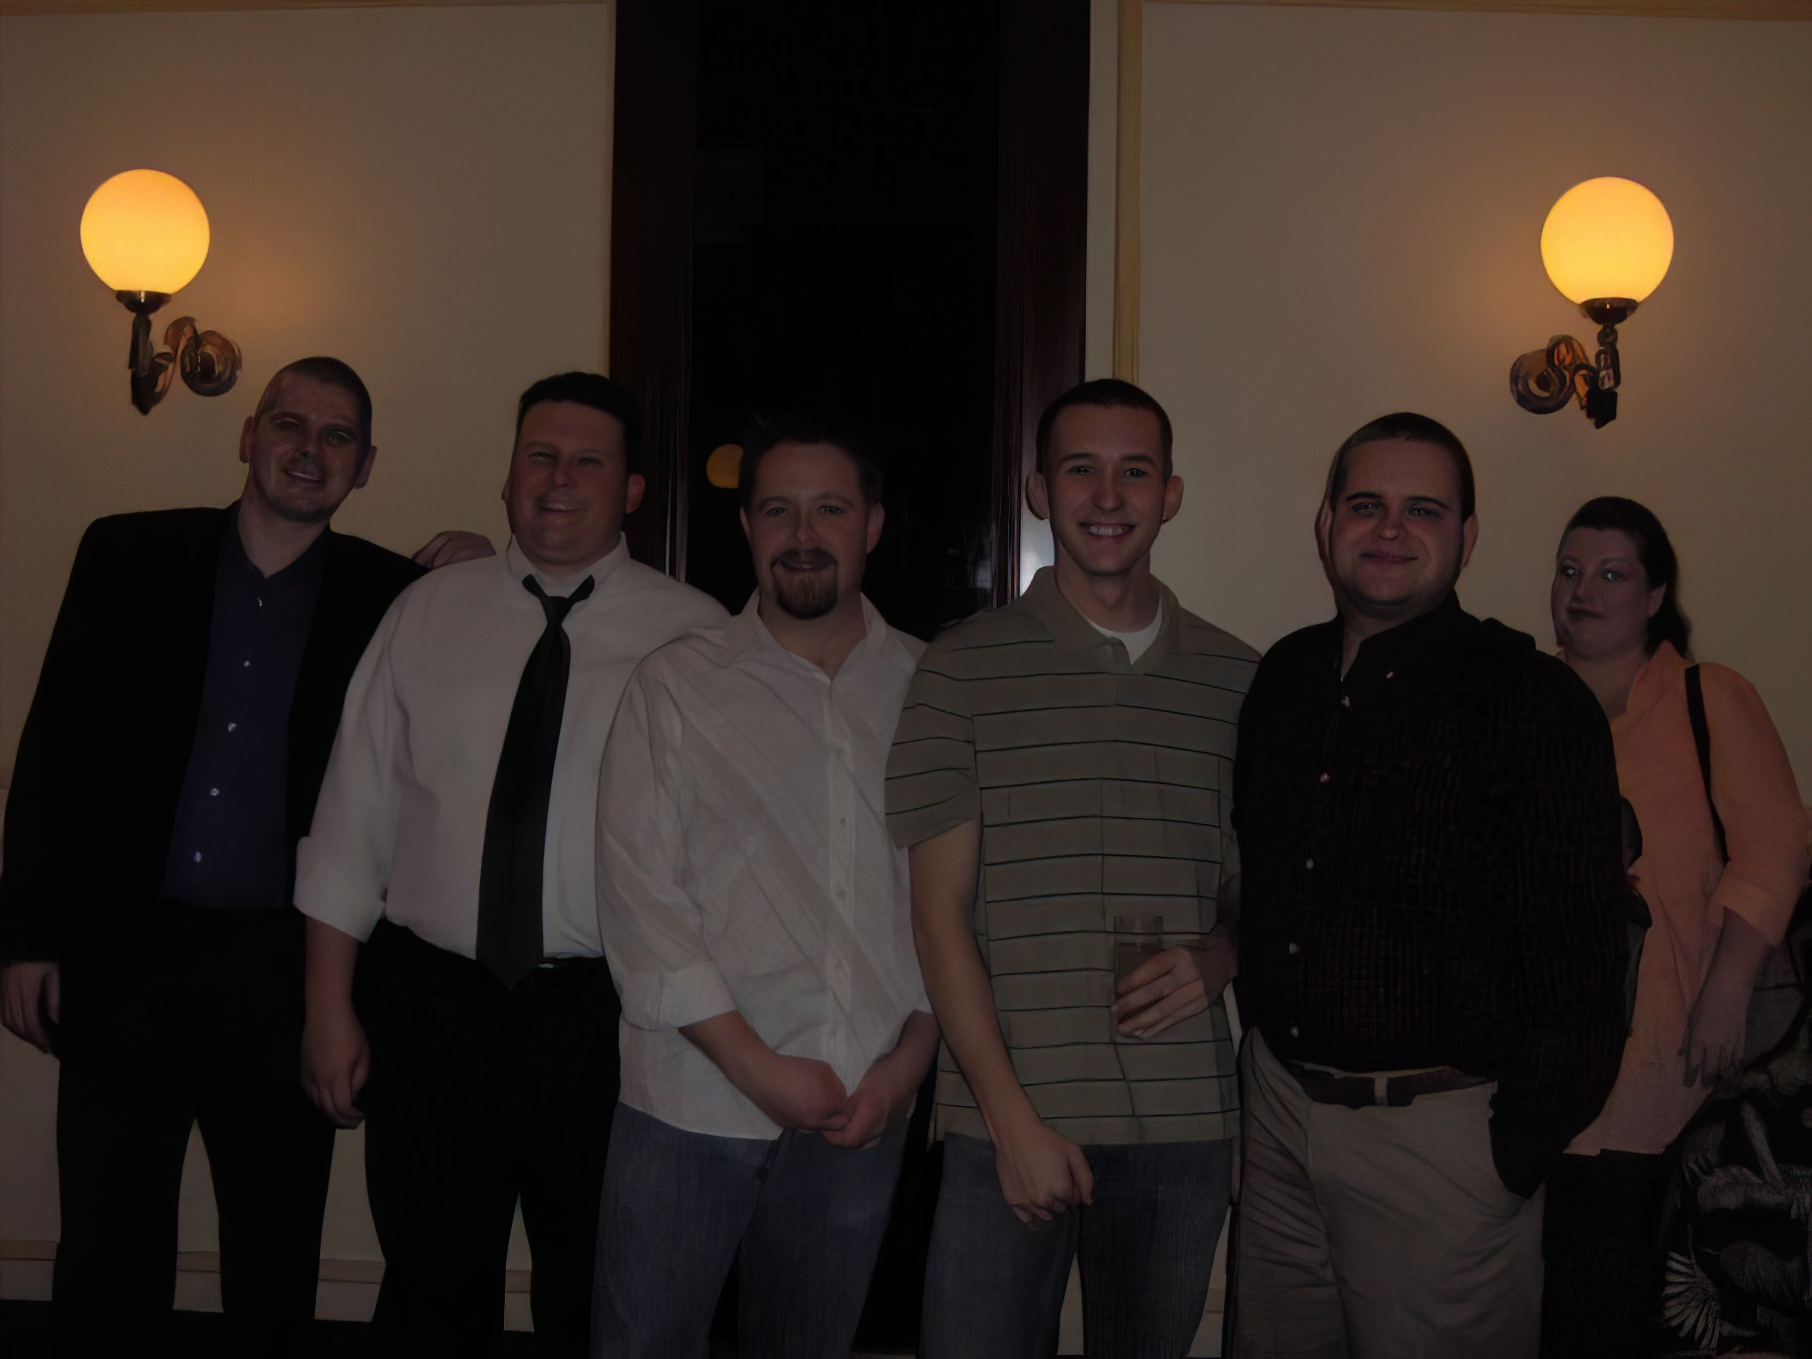 The entire DealNews dev team in Las Vegas, April 2007. Wow, we were so young!